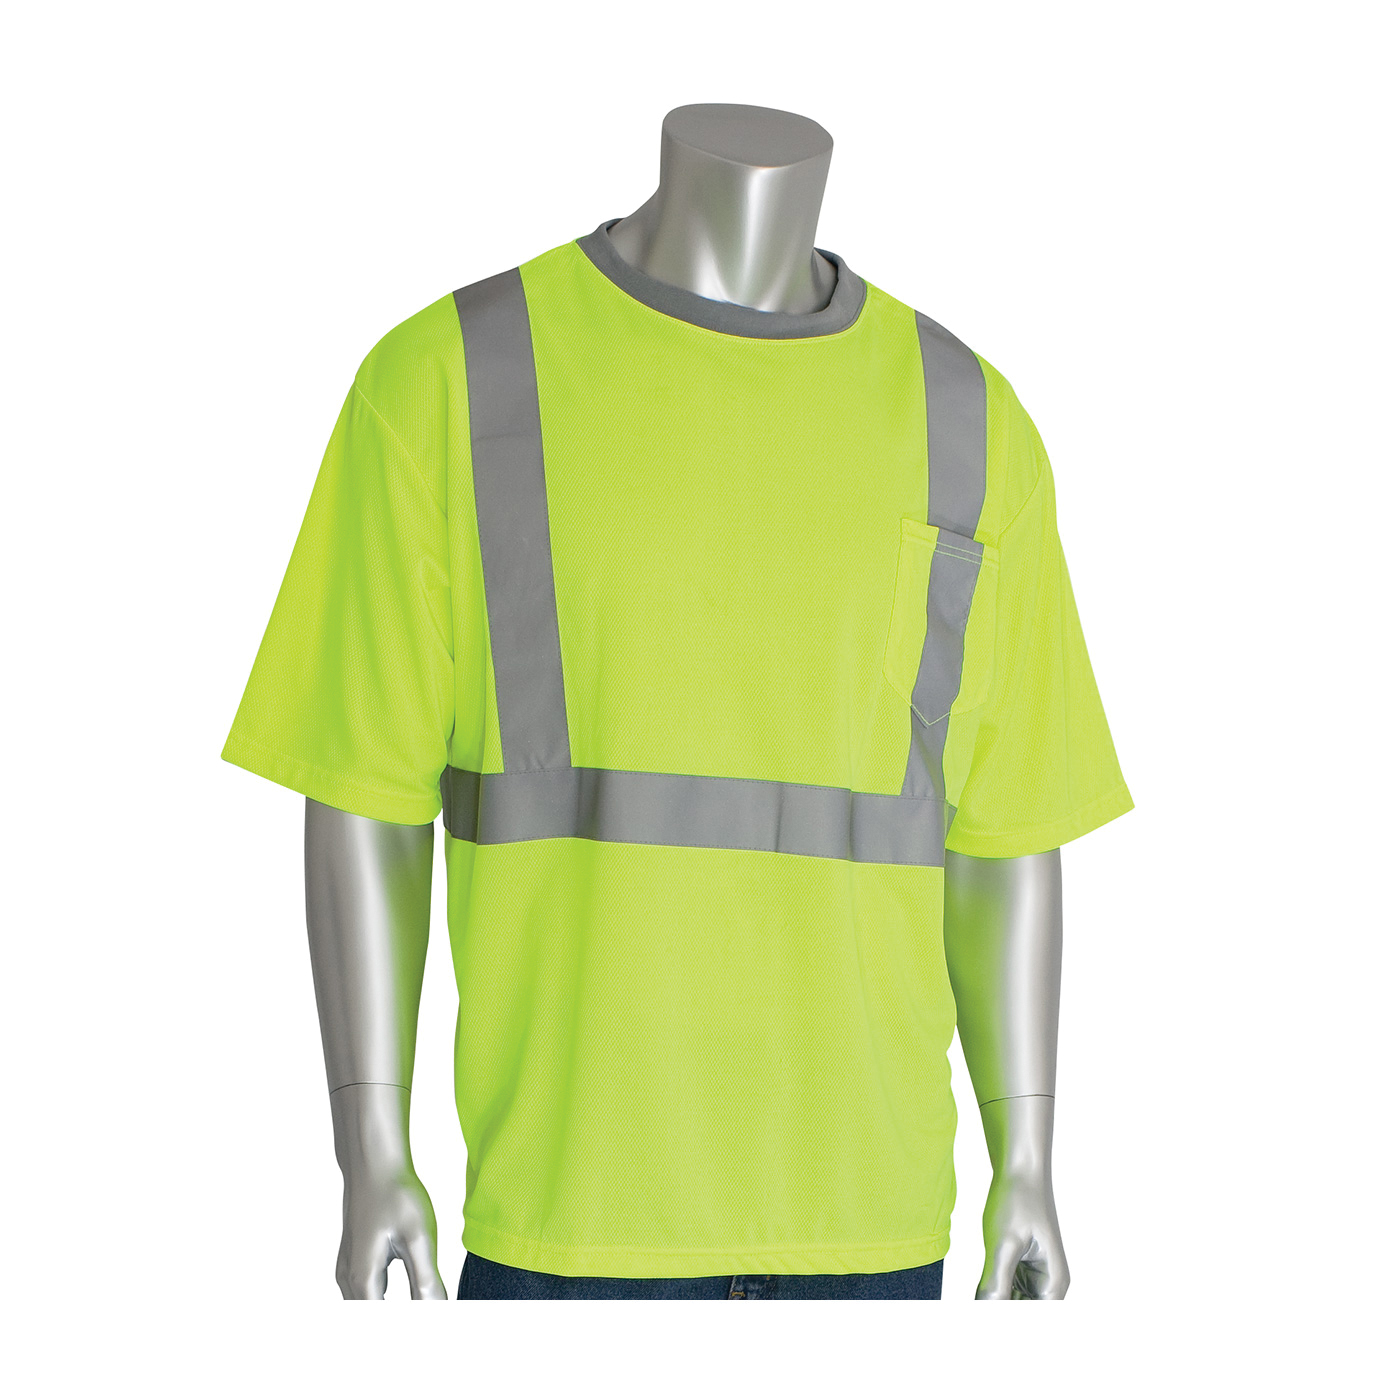 PIP® 312-1200-LY/5X Short Sleeve Crew Neck T-Shirt With Reflective, 5XL, Hi-Viz Lime Yellow, Bird's Eye Polyester, 35 in L